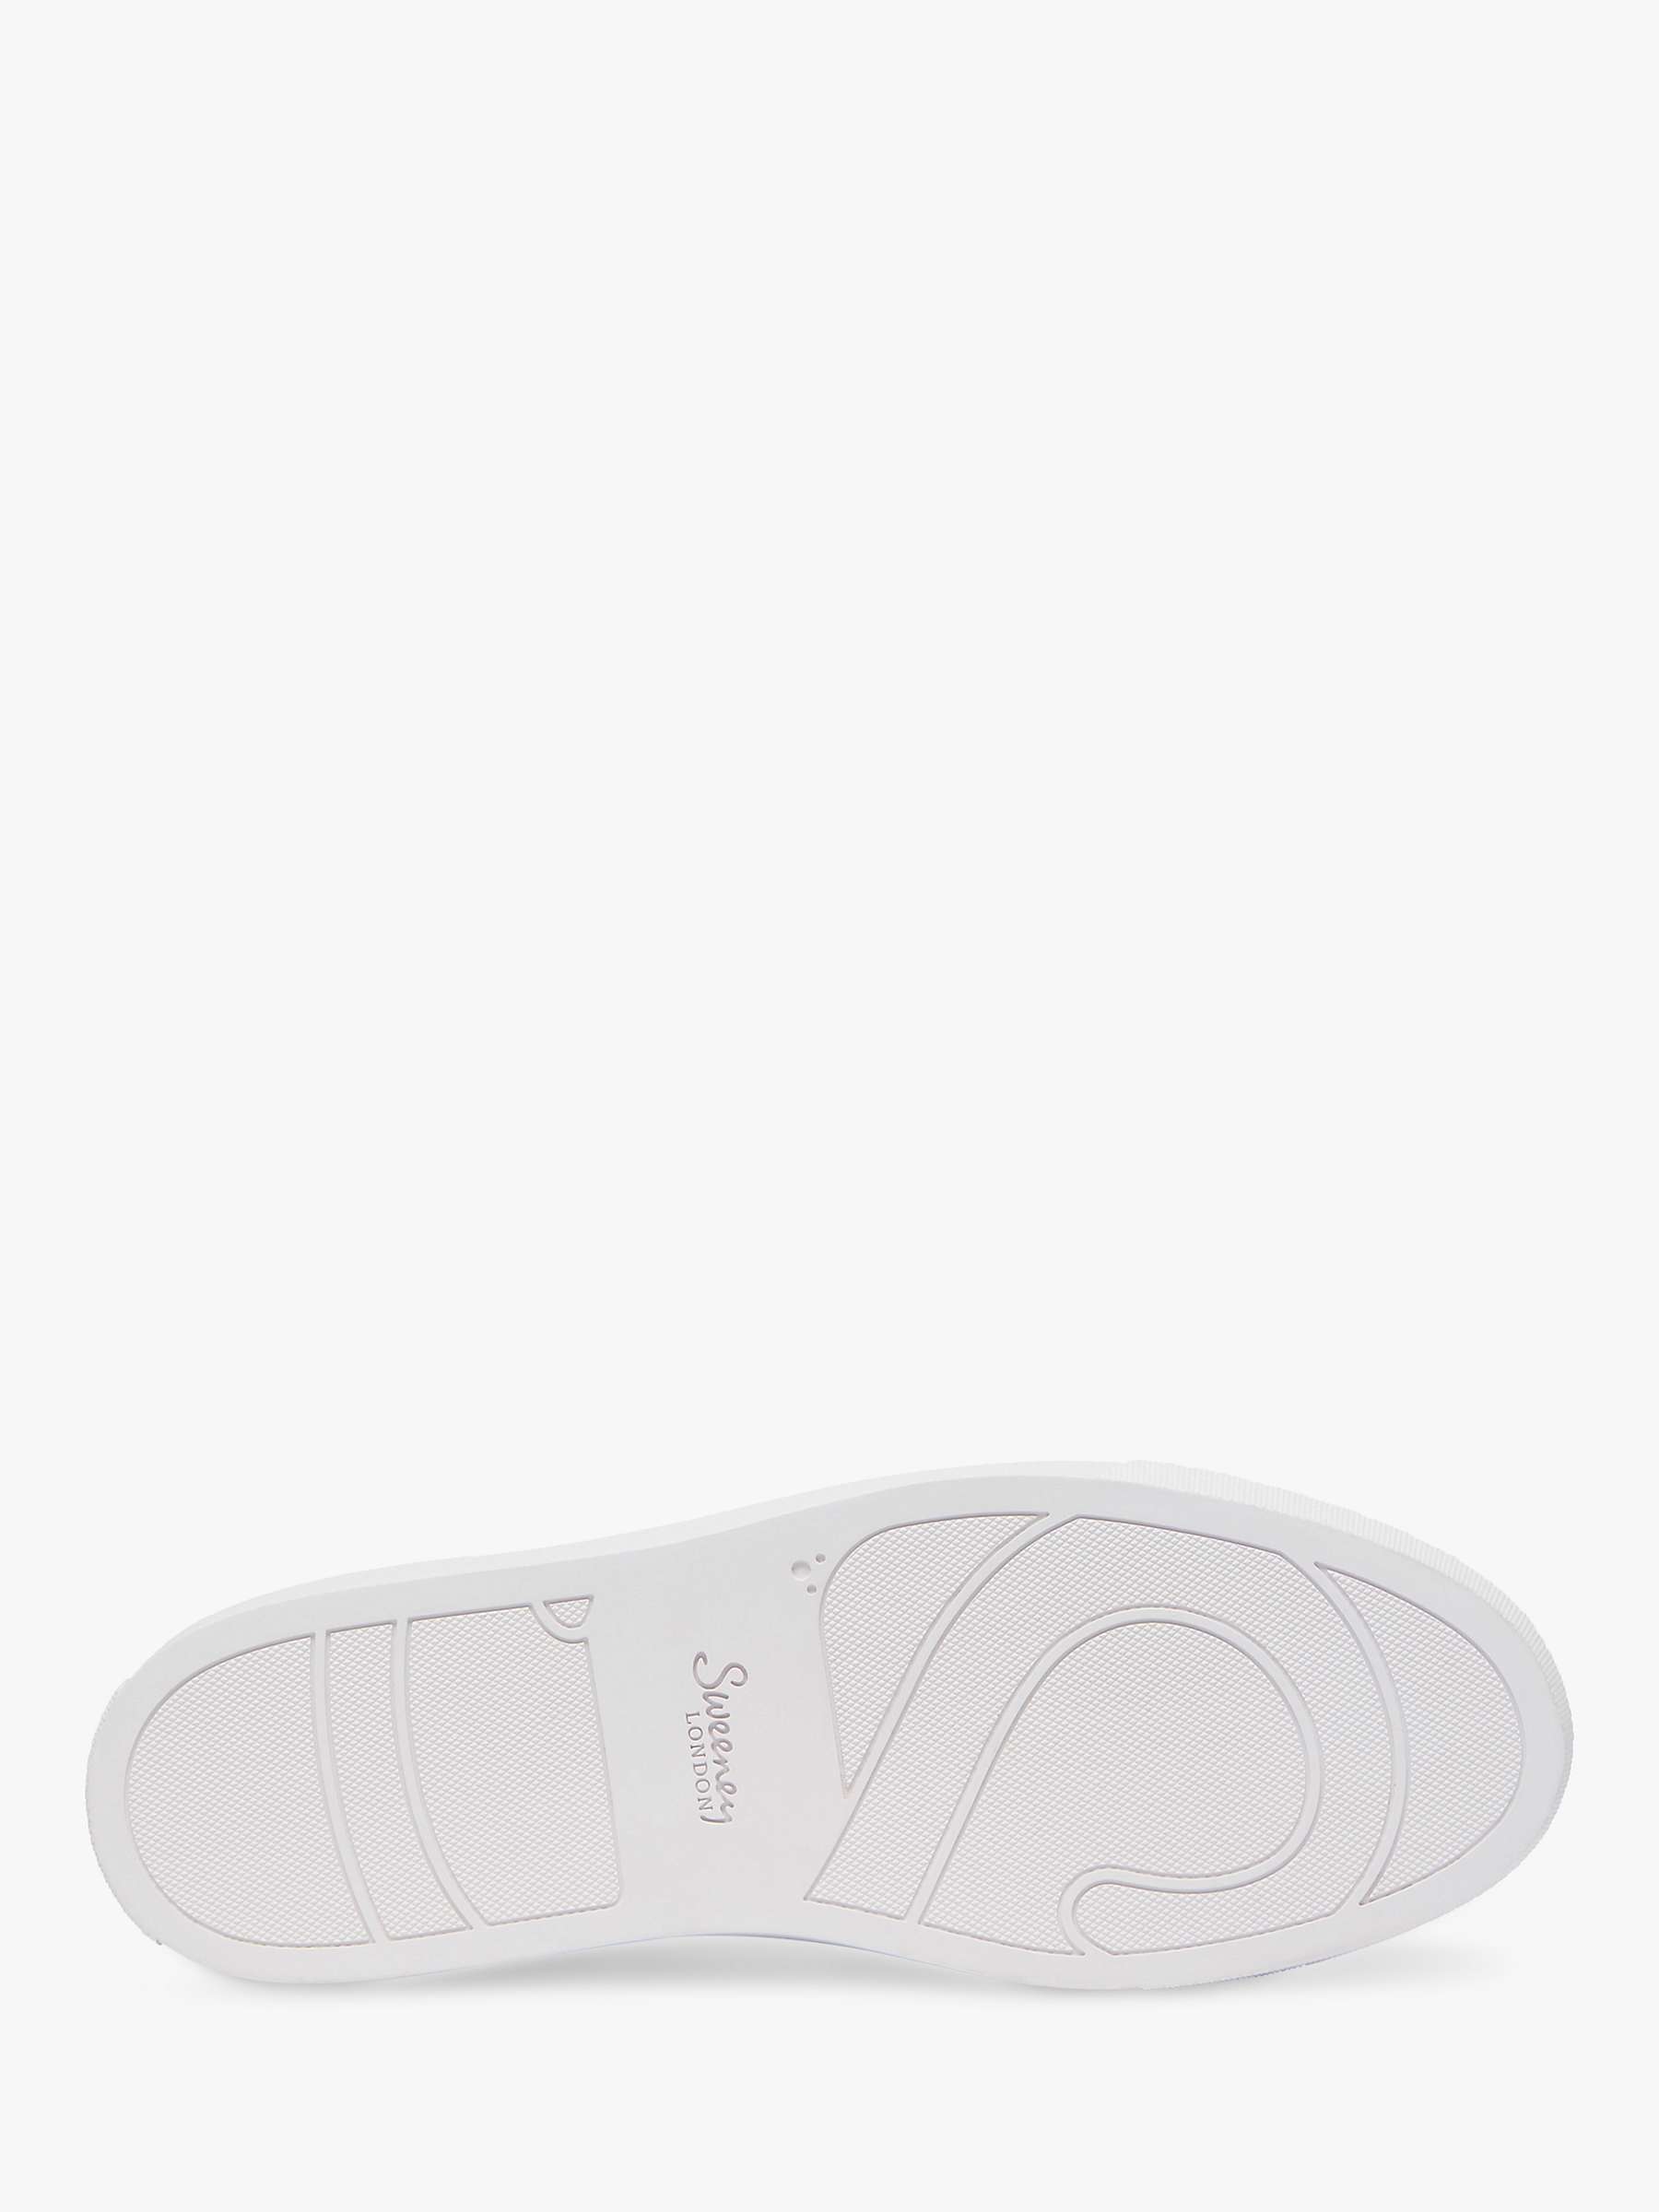 Buy Oliver Sweeney Hayle Leather Trainers Online at johnlewis.com